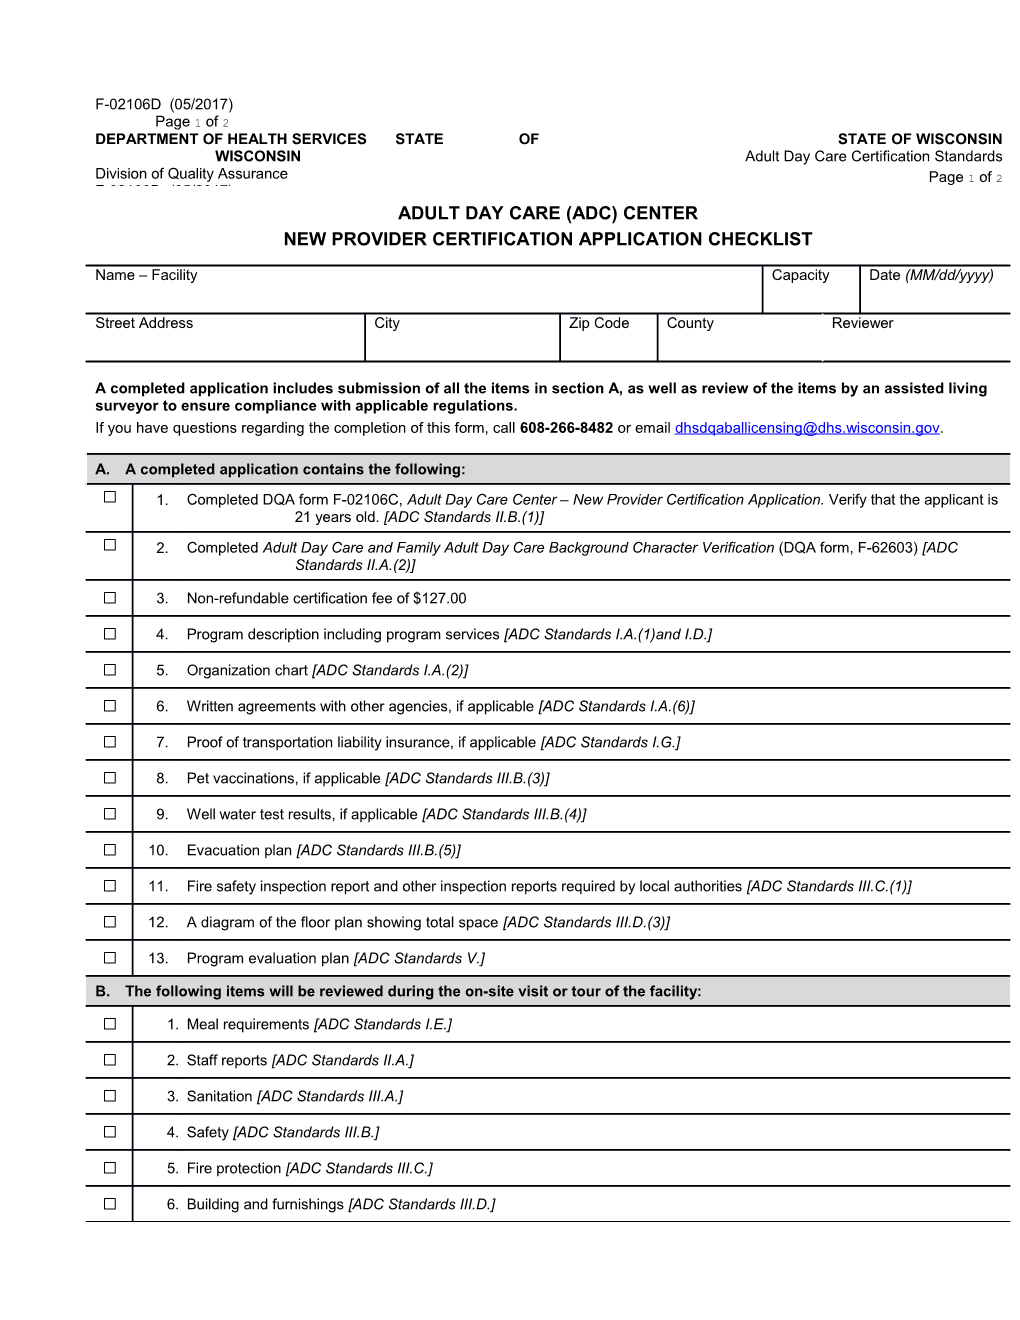 Adult Day Care Center - New Provider Certification Application Checklist, F-02106D